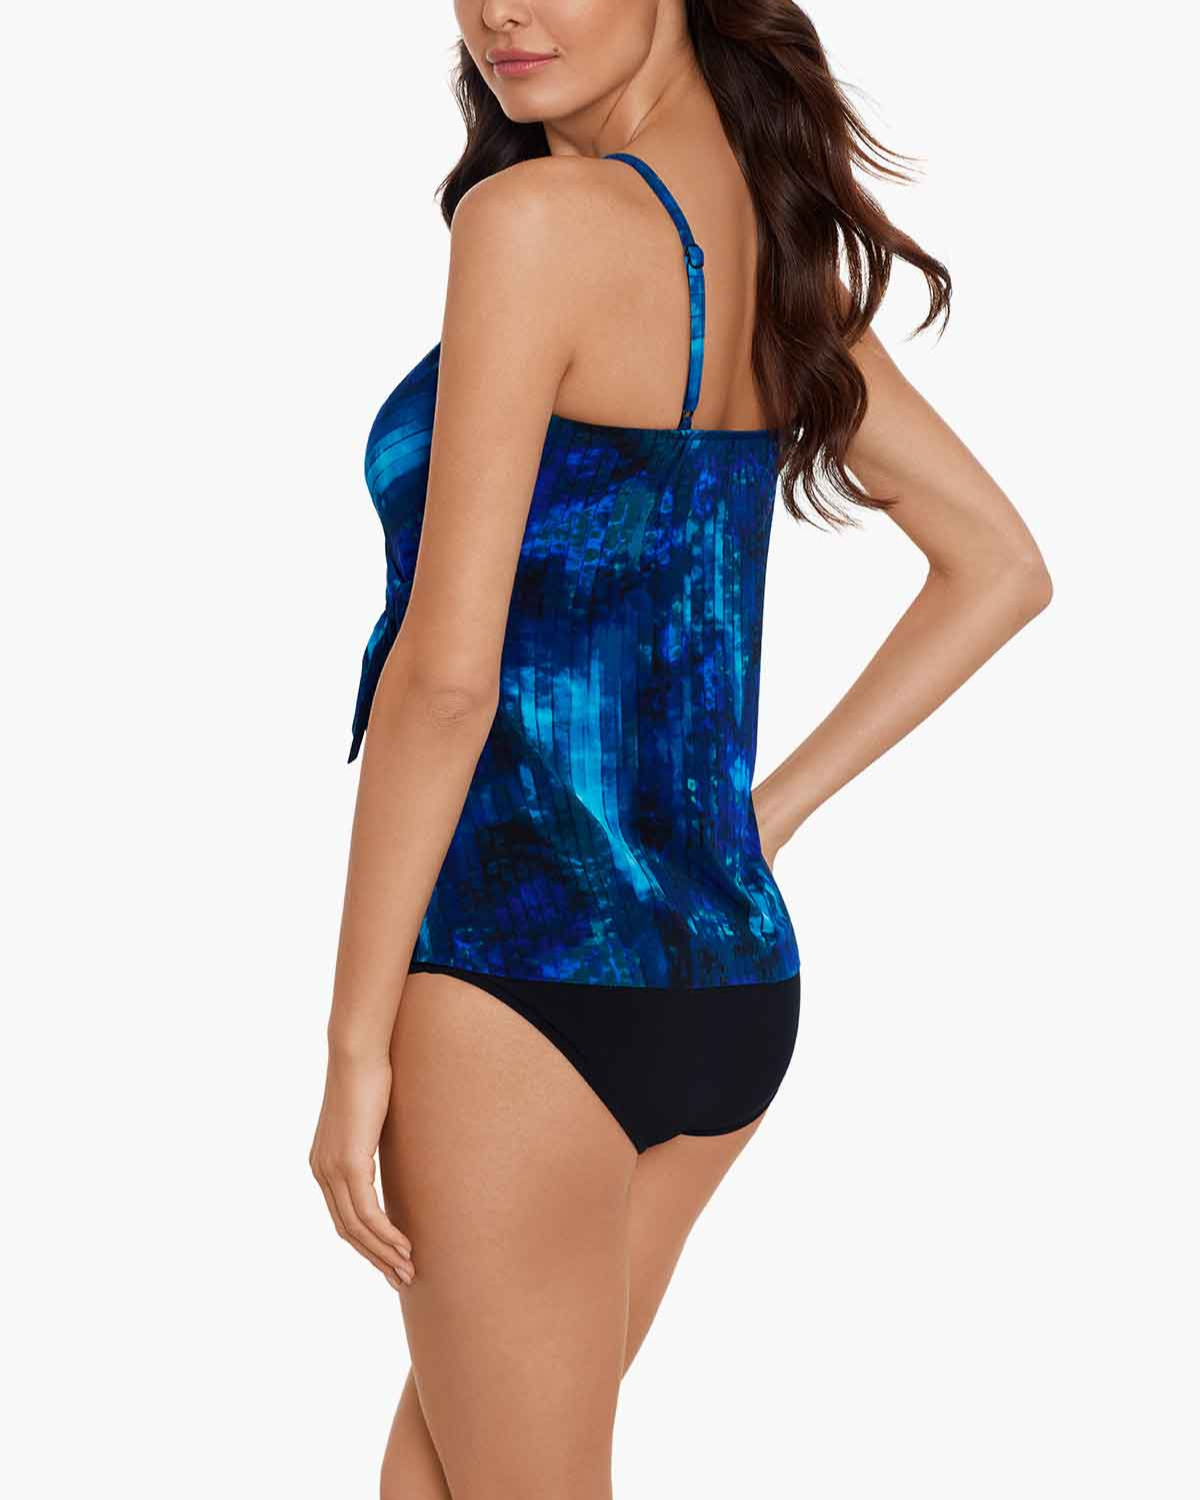 Model wearing a tankini top with adjustable straps in and abstract blue, black and navy 